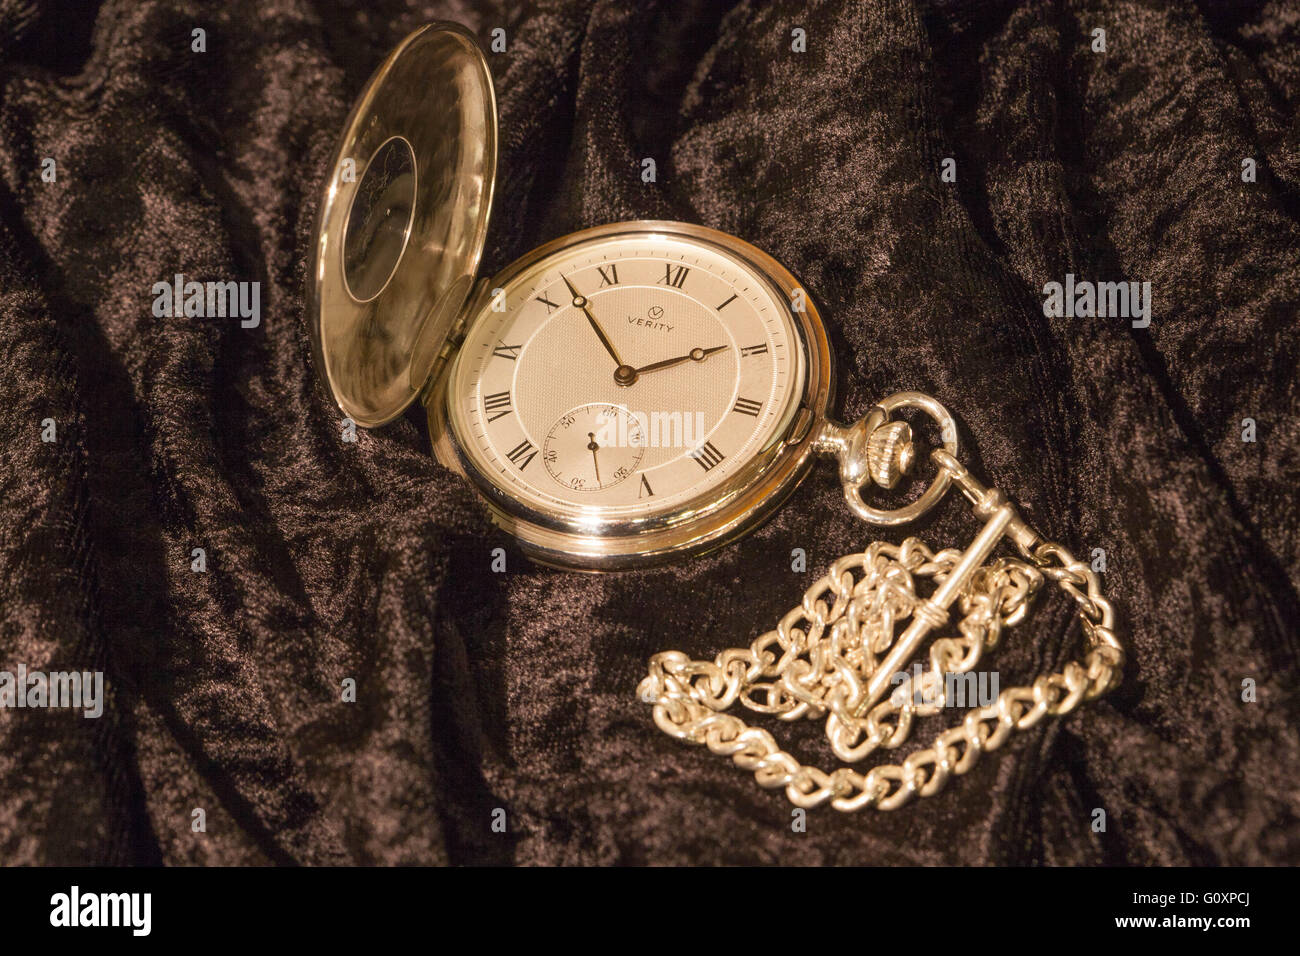 A open pocket watch and chain Stock Photo